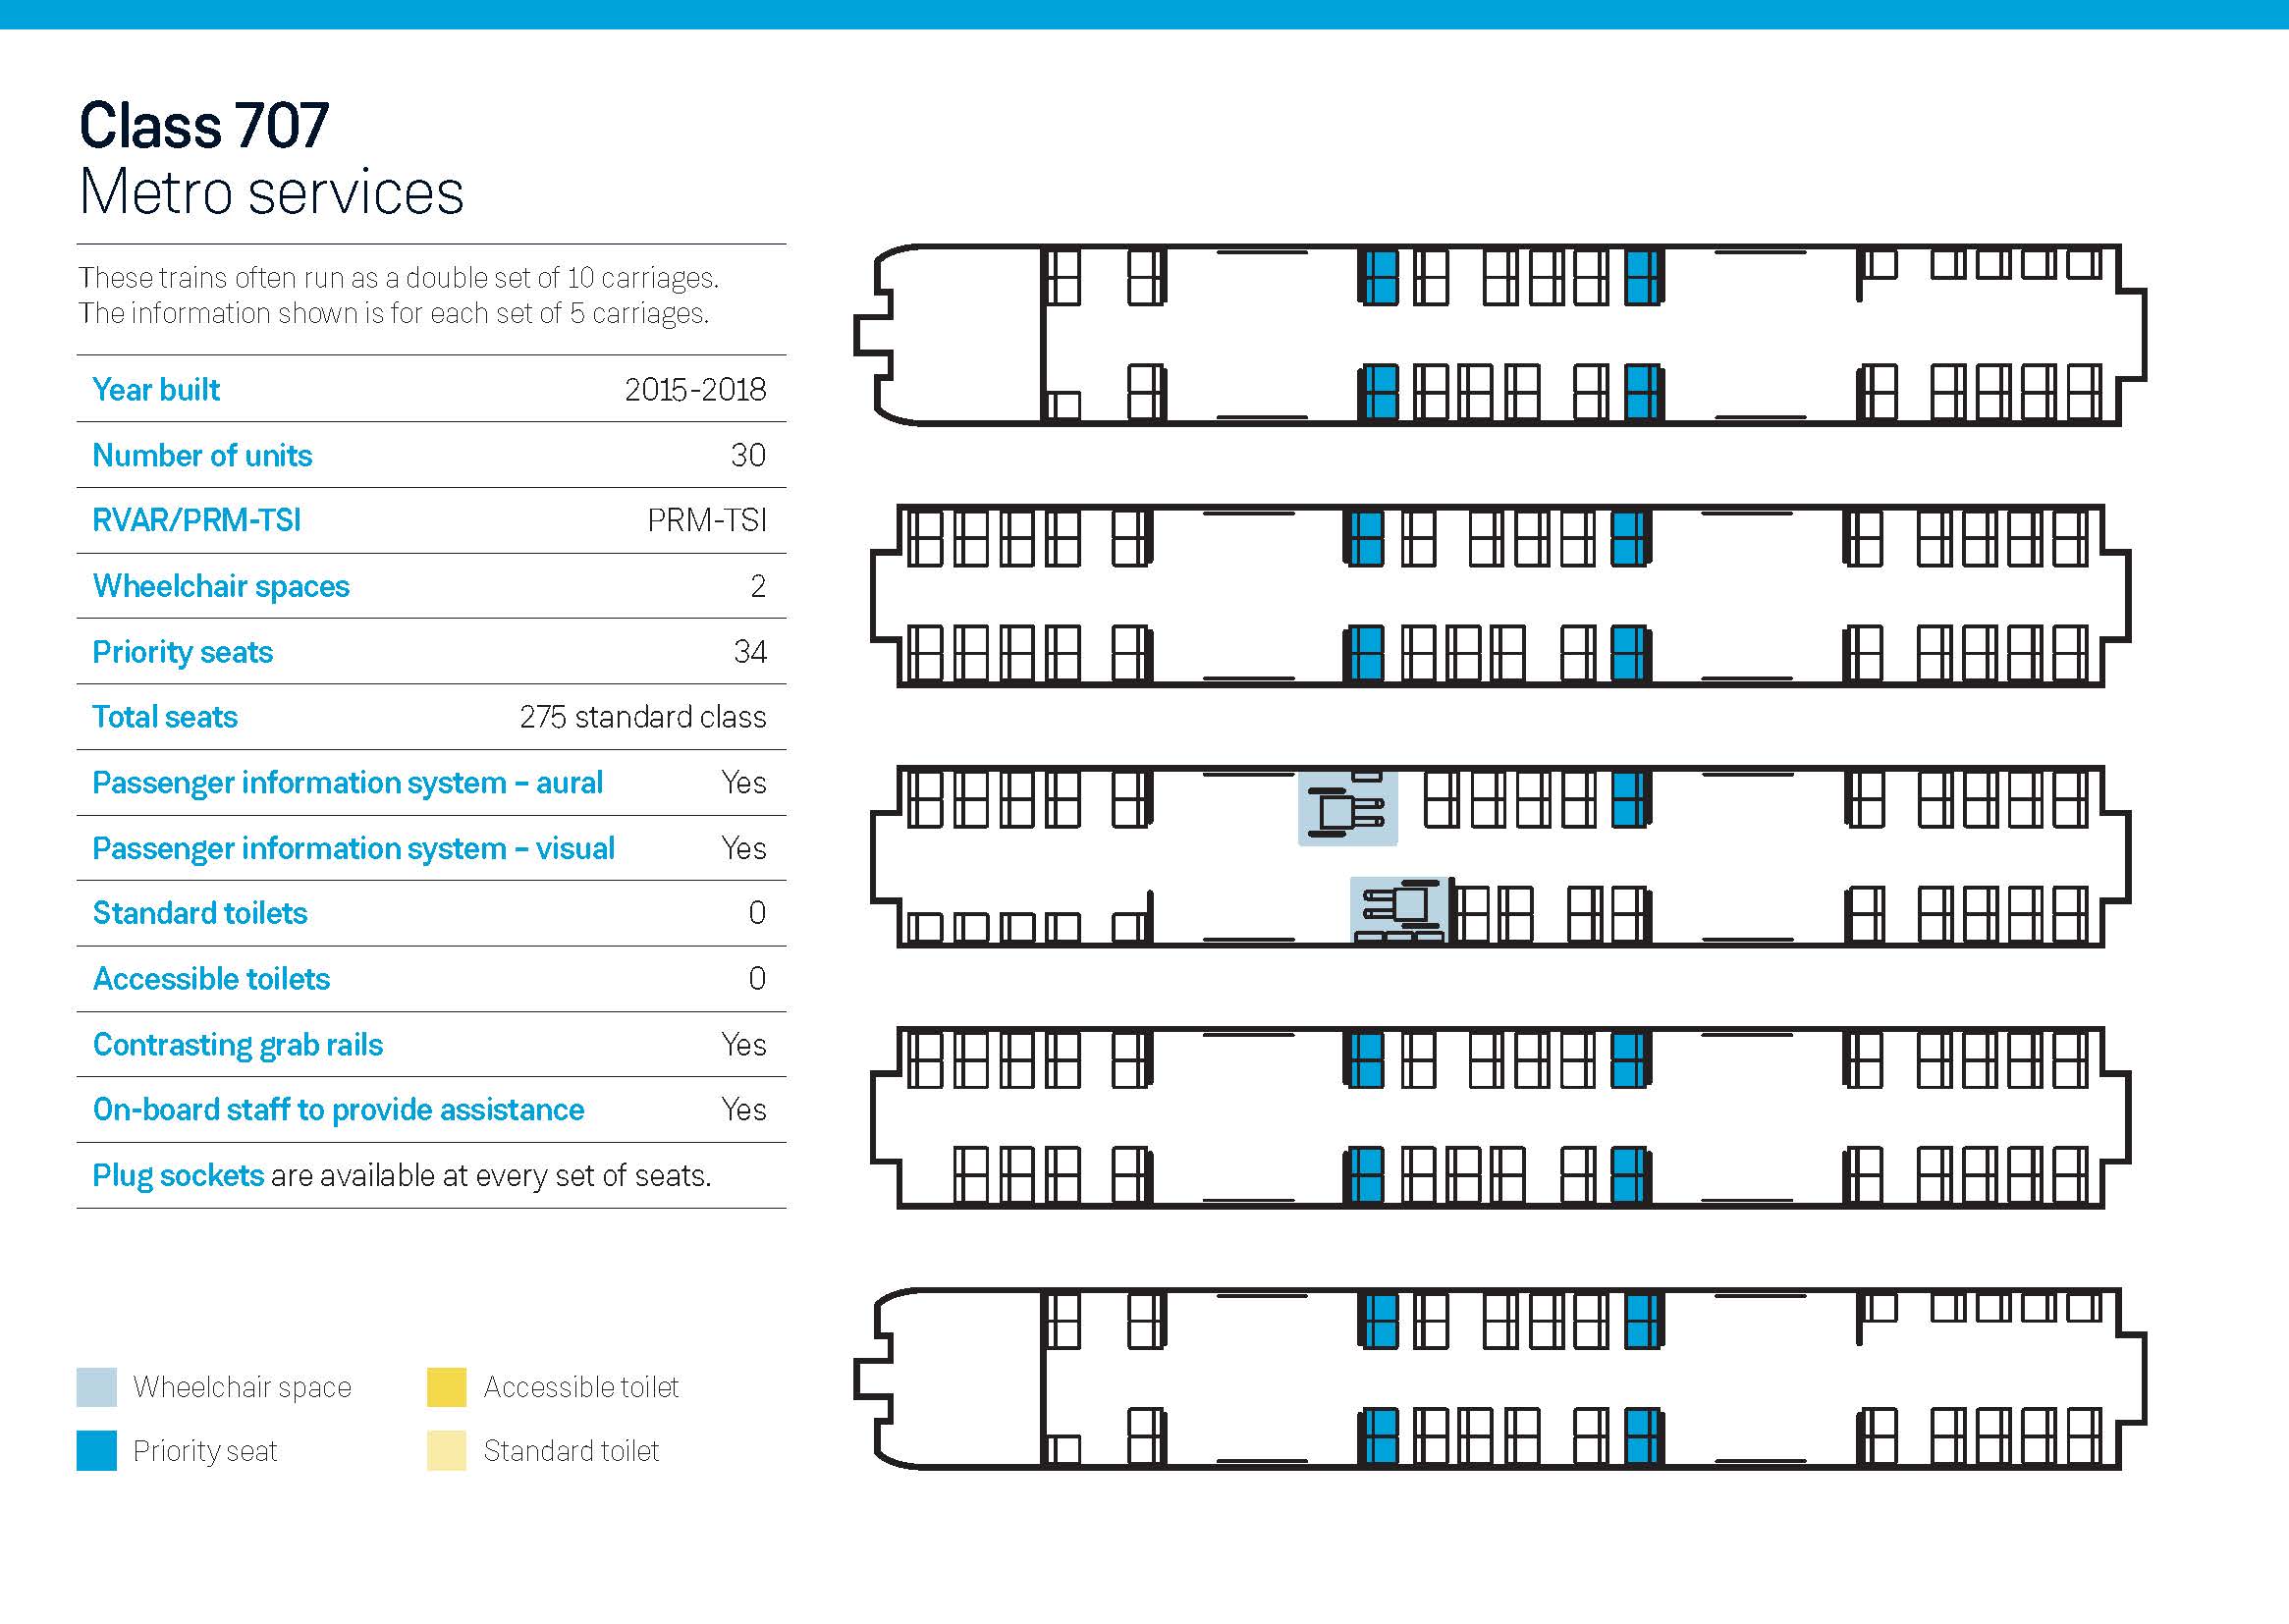 Class 707 Carriage Layout